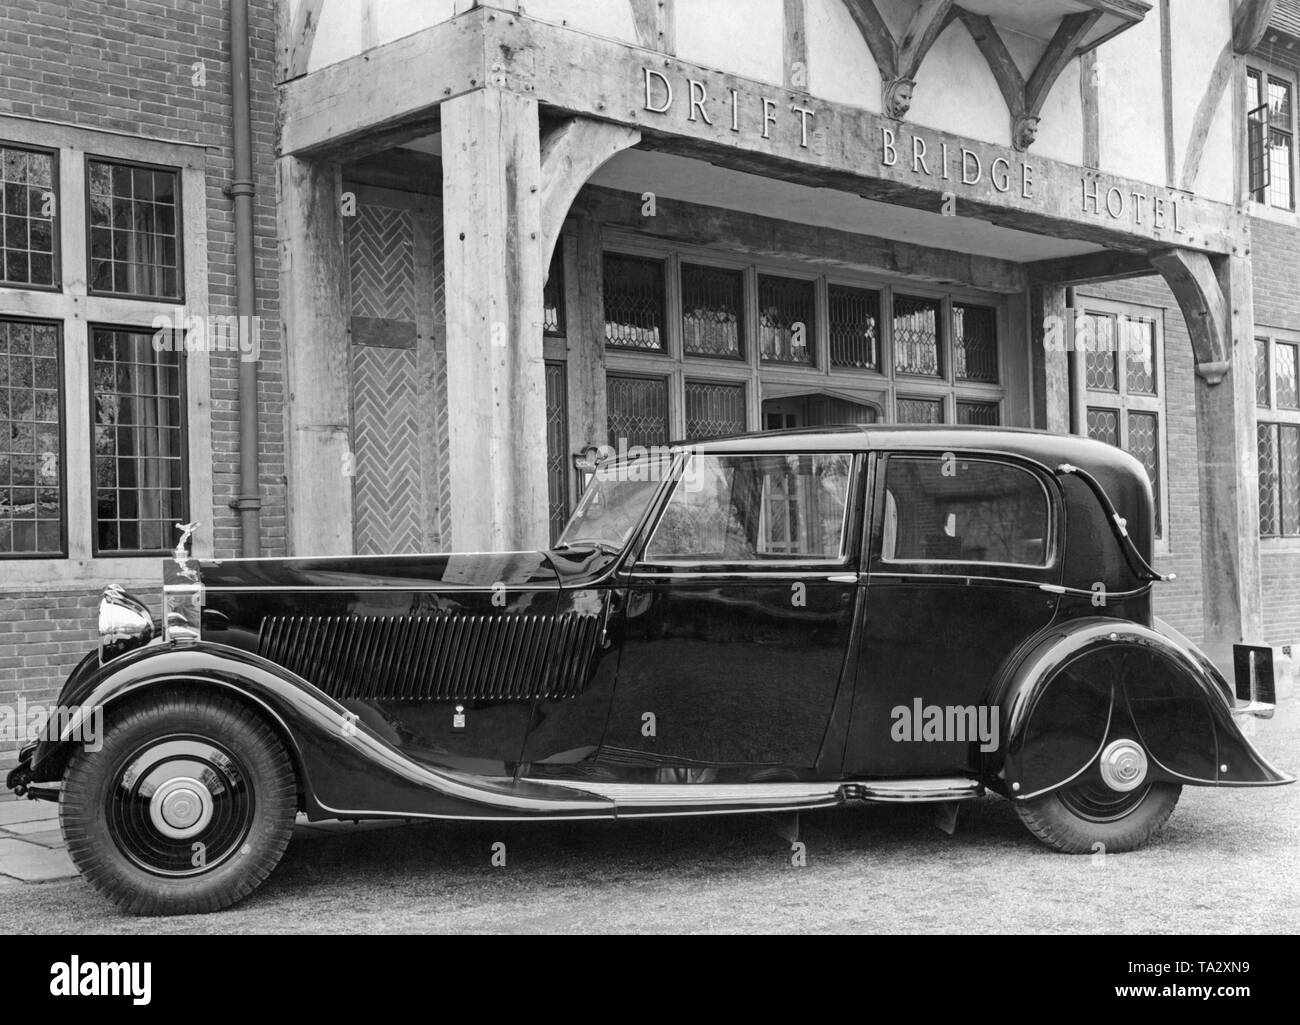 A Rolls Royce Silver Ghost with a special Sedanca Coupe body for the Georgian Prince Alexis Mdiwani. The body is a custom-made item of the car body manufacturing company Thrupp & Maberly Ltd. Stock Photo